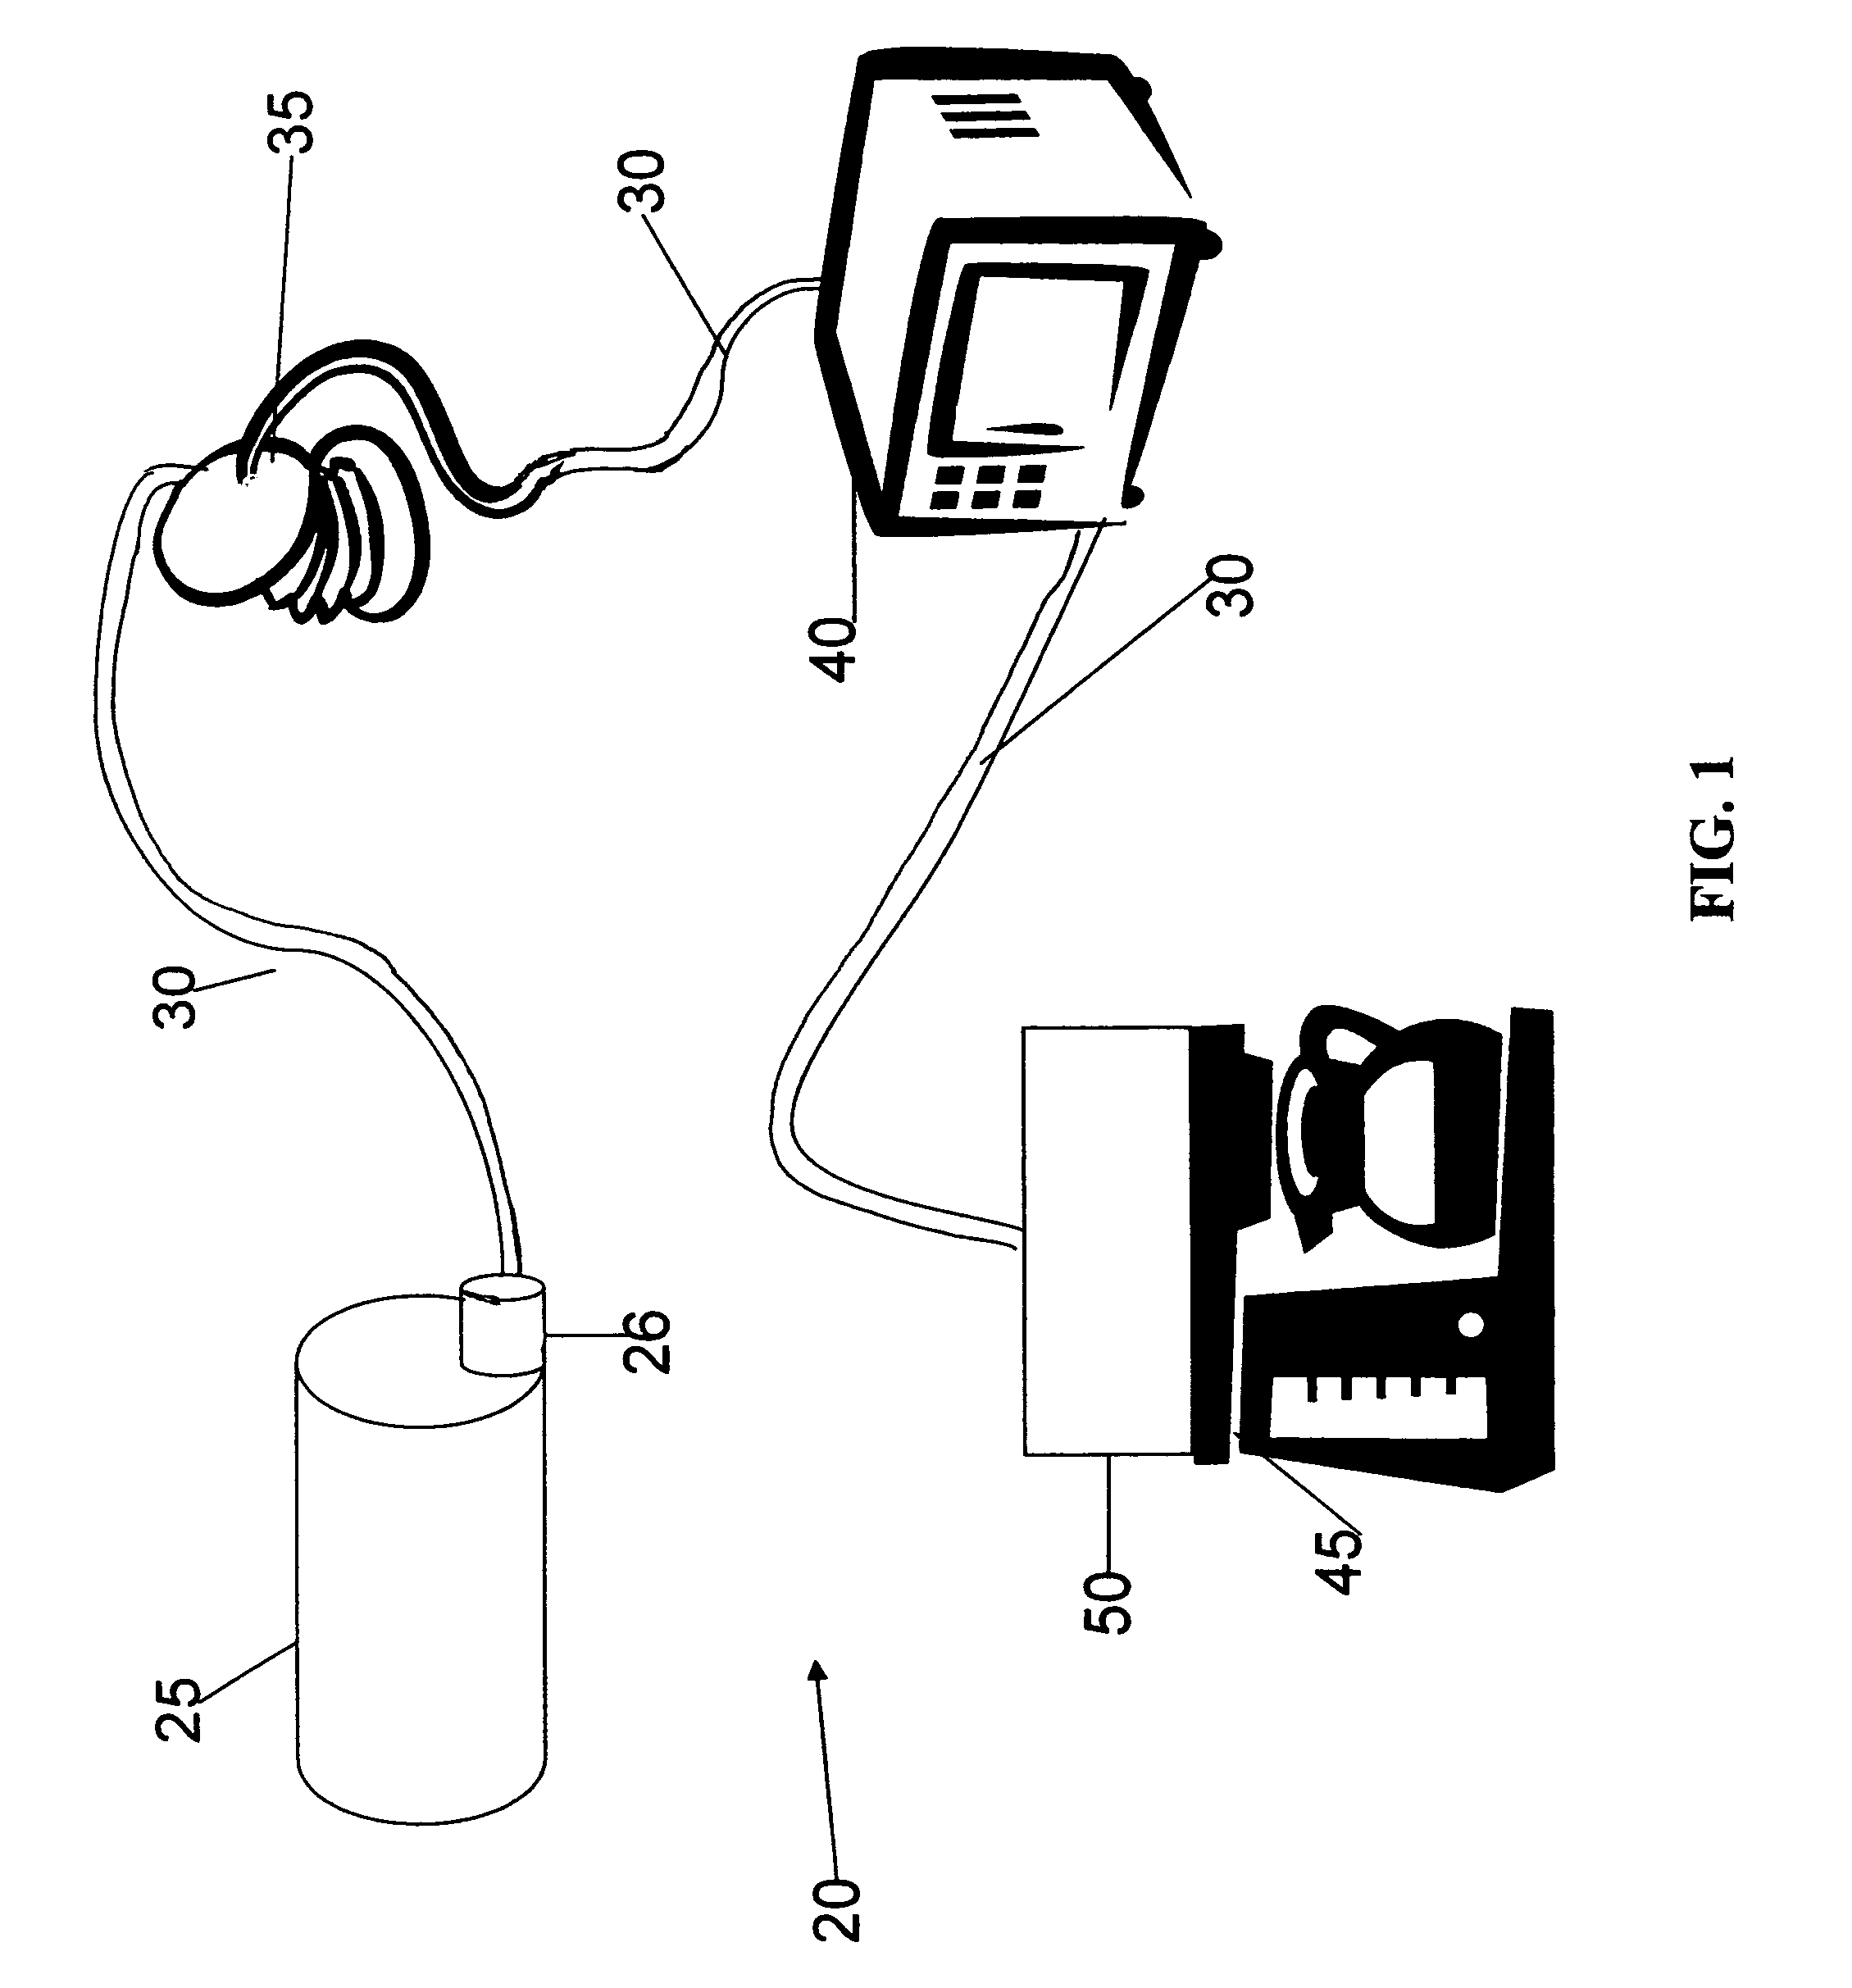 Method and apparatus for heating and aseptic dispensing of sterile product